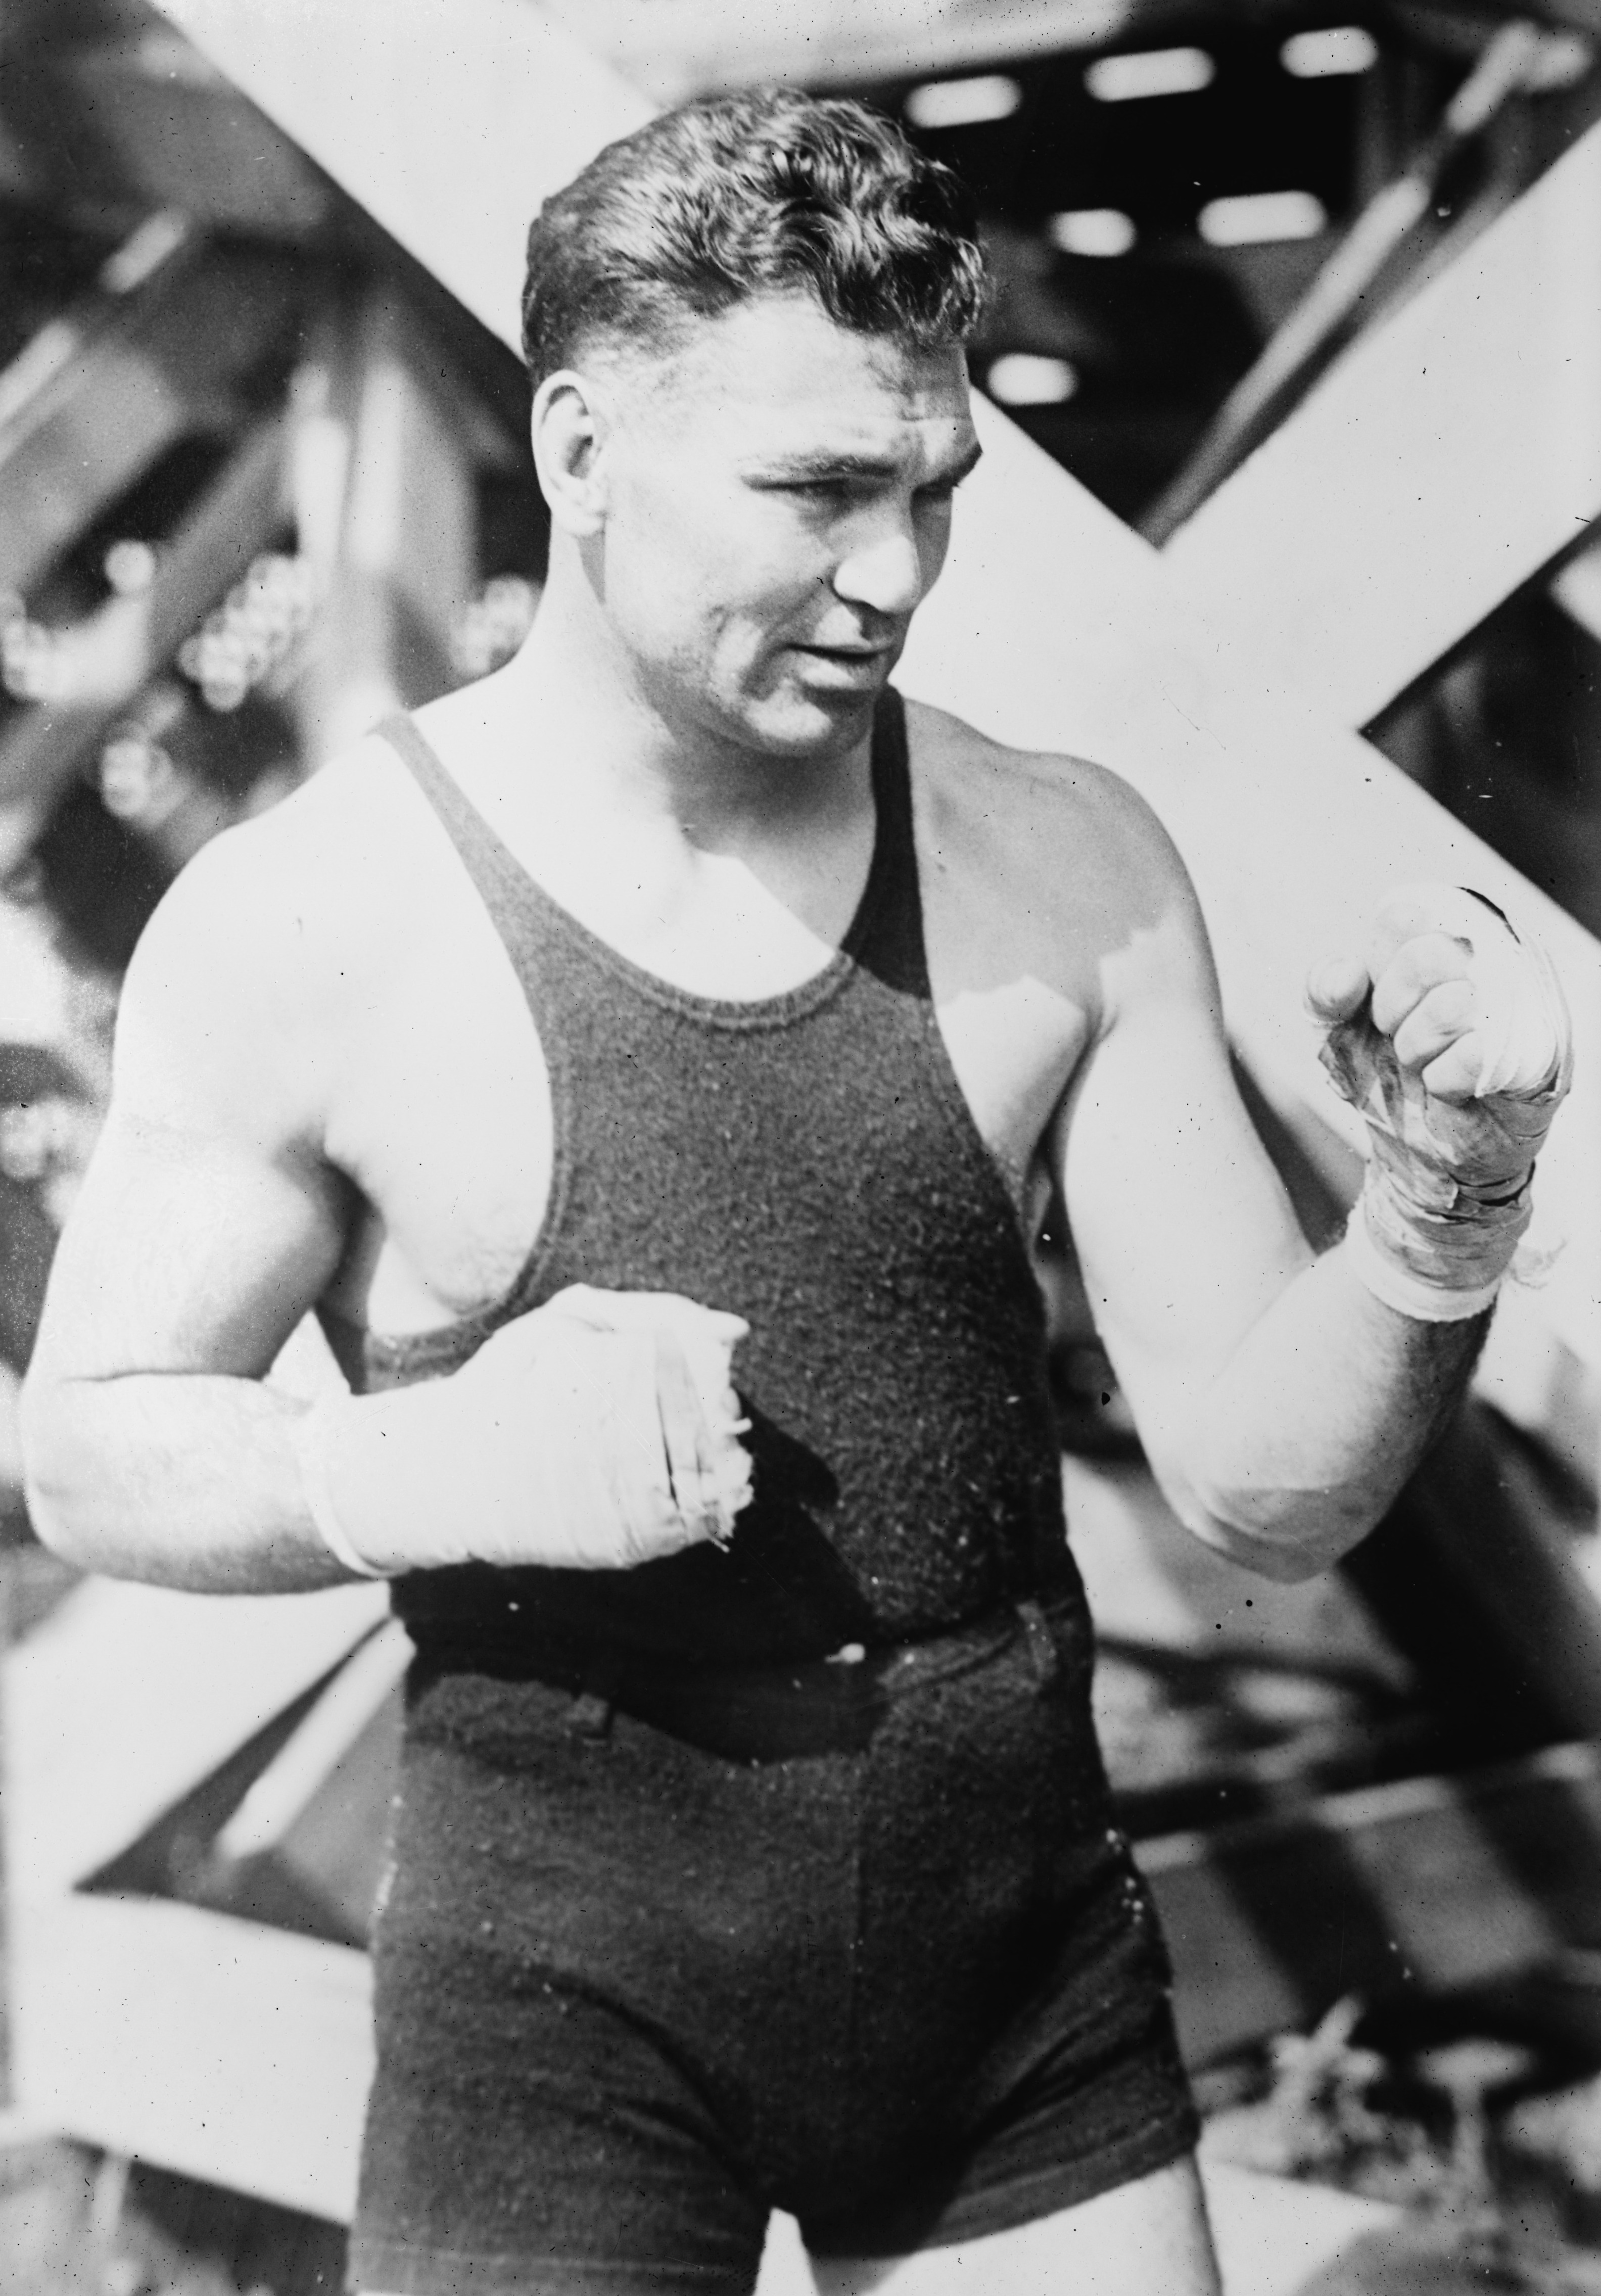 Best Books on Boxing: Championship Fighting By Jack Dempsey